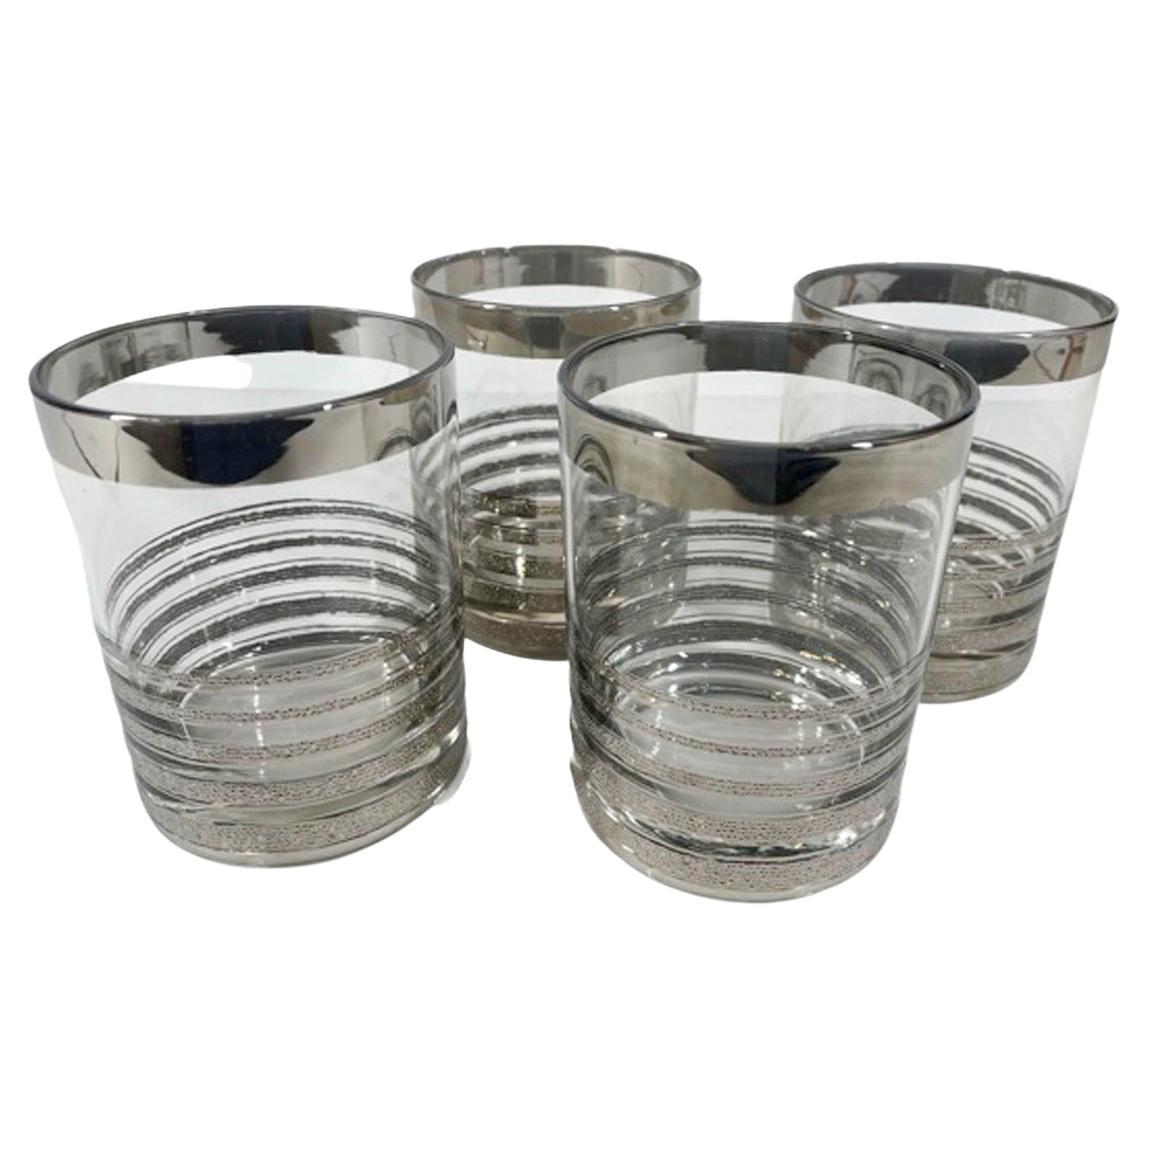 Vintage Silver Decorated Rocks Glasses with Smooth and Textured Graduated Bands